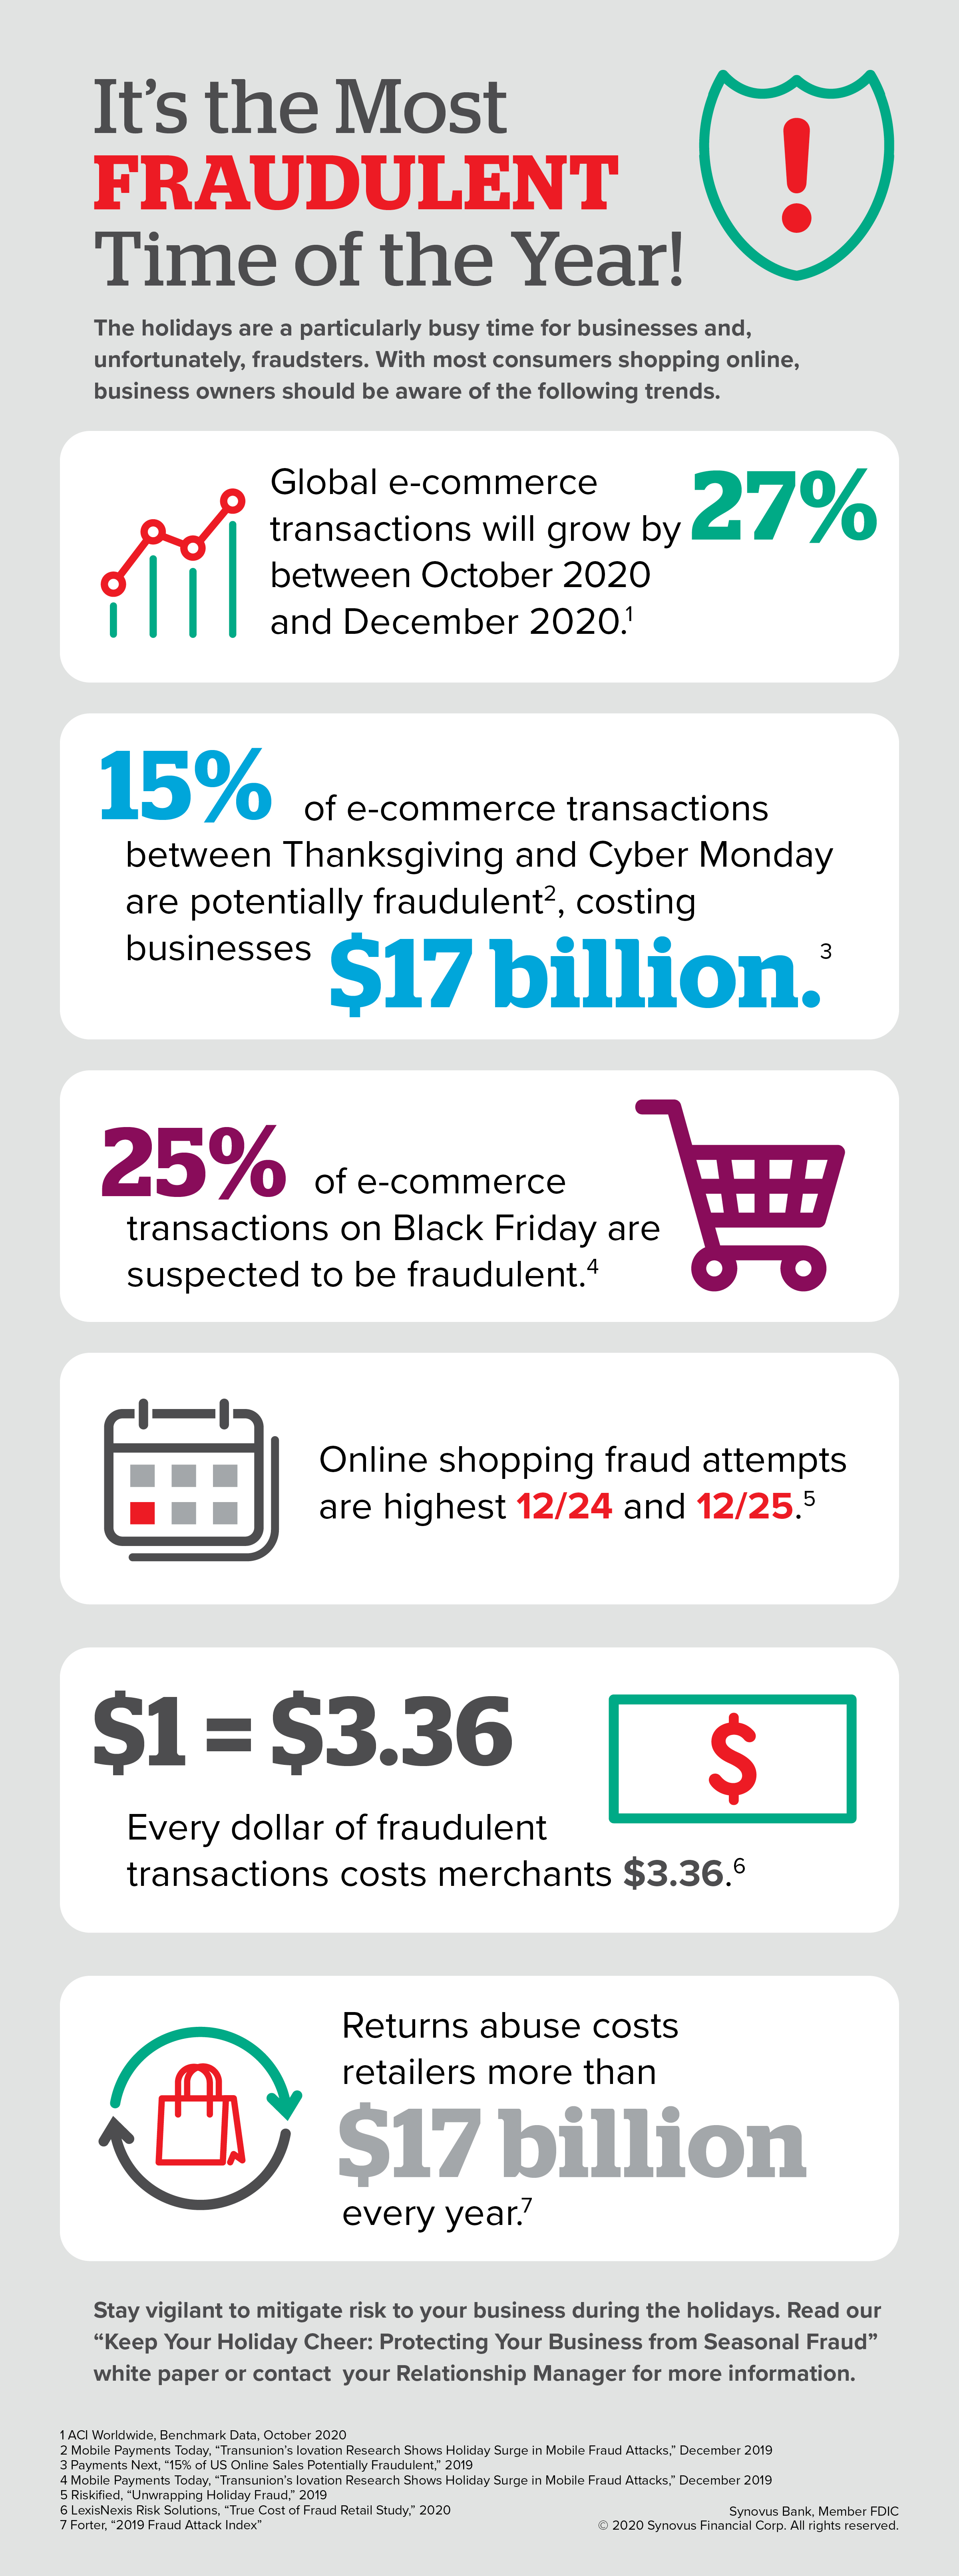 Infographic describing holiday fraud. A full description of the infographic is available through a link beneath the image.